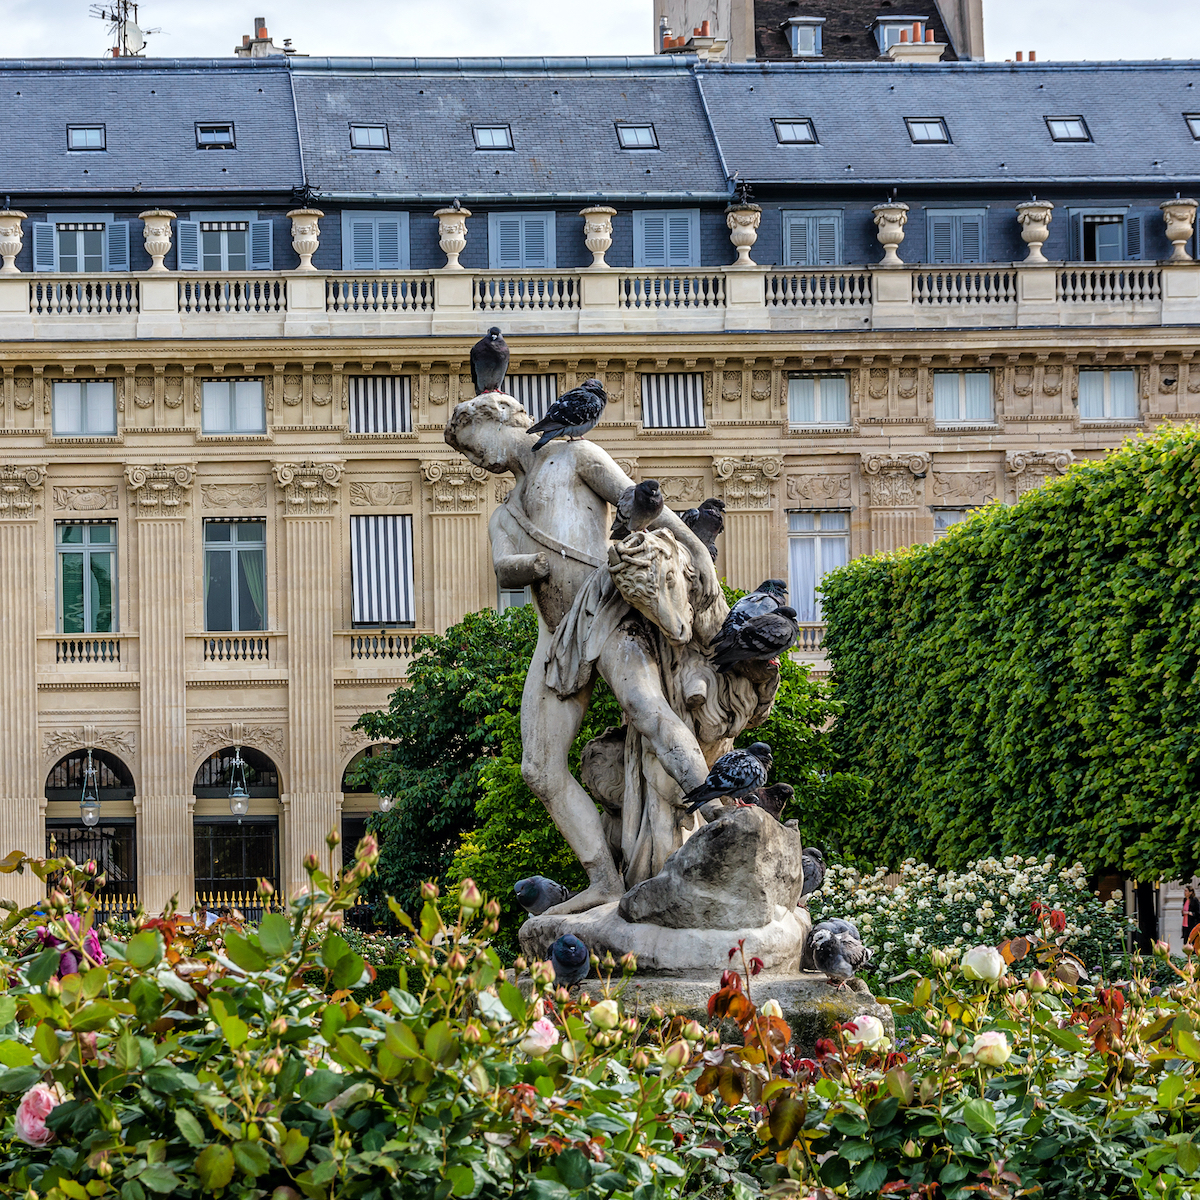 Do you know this starry terrace in the garden of the Palais-Royal?